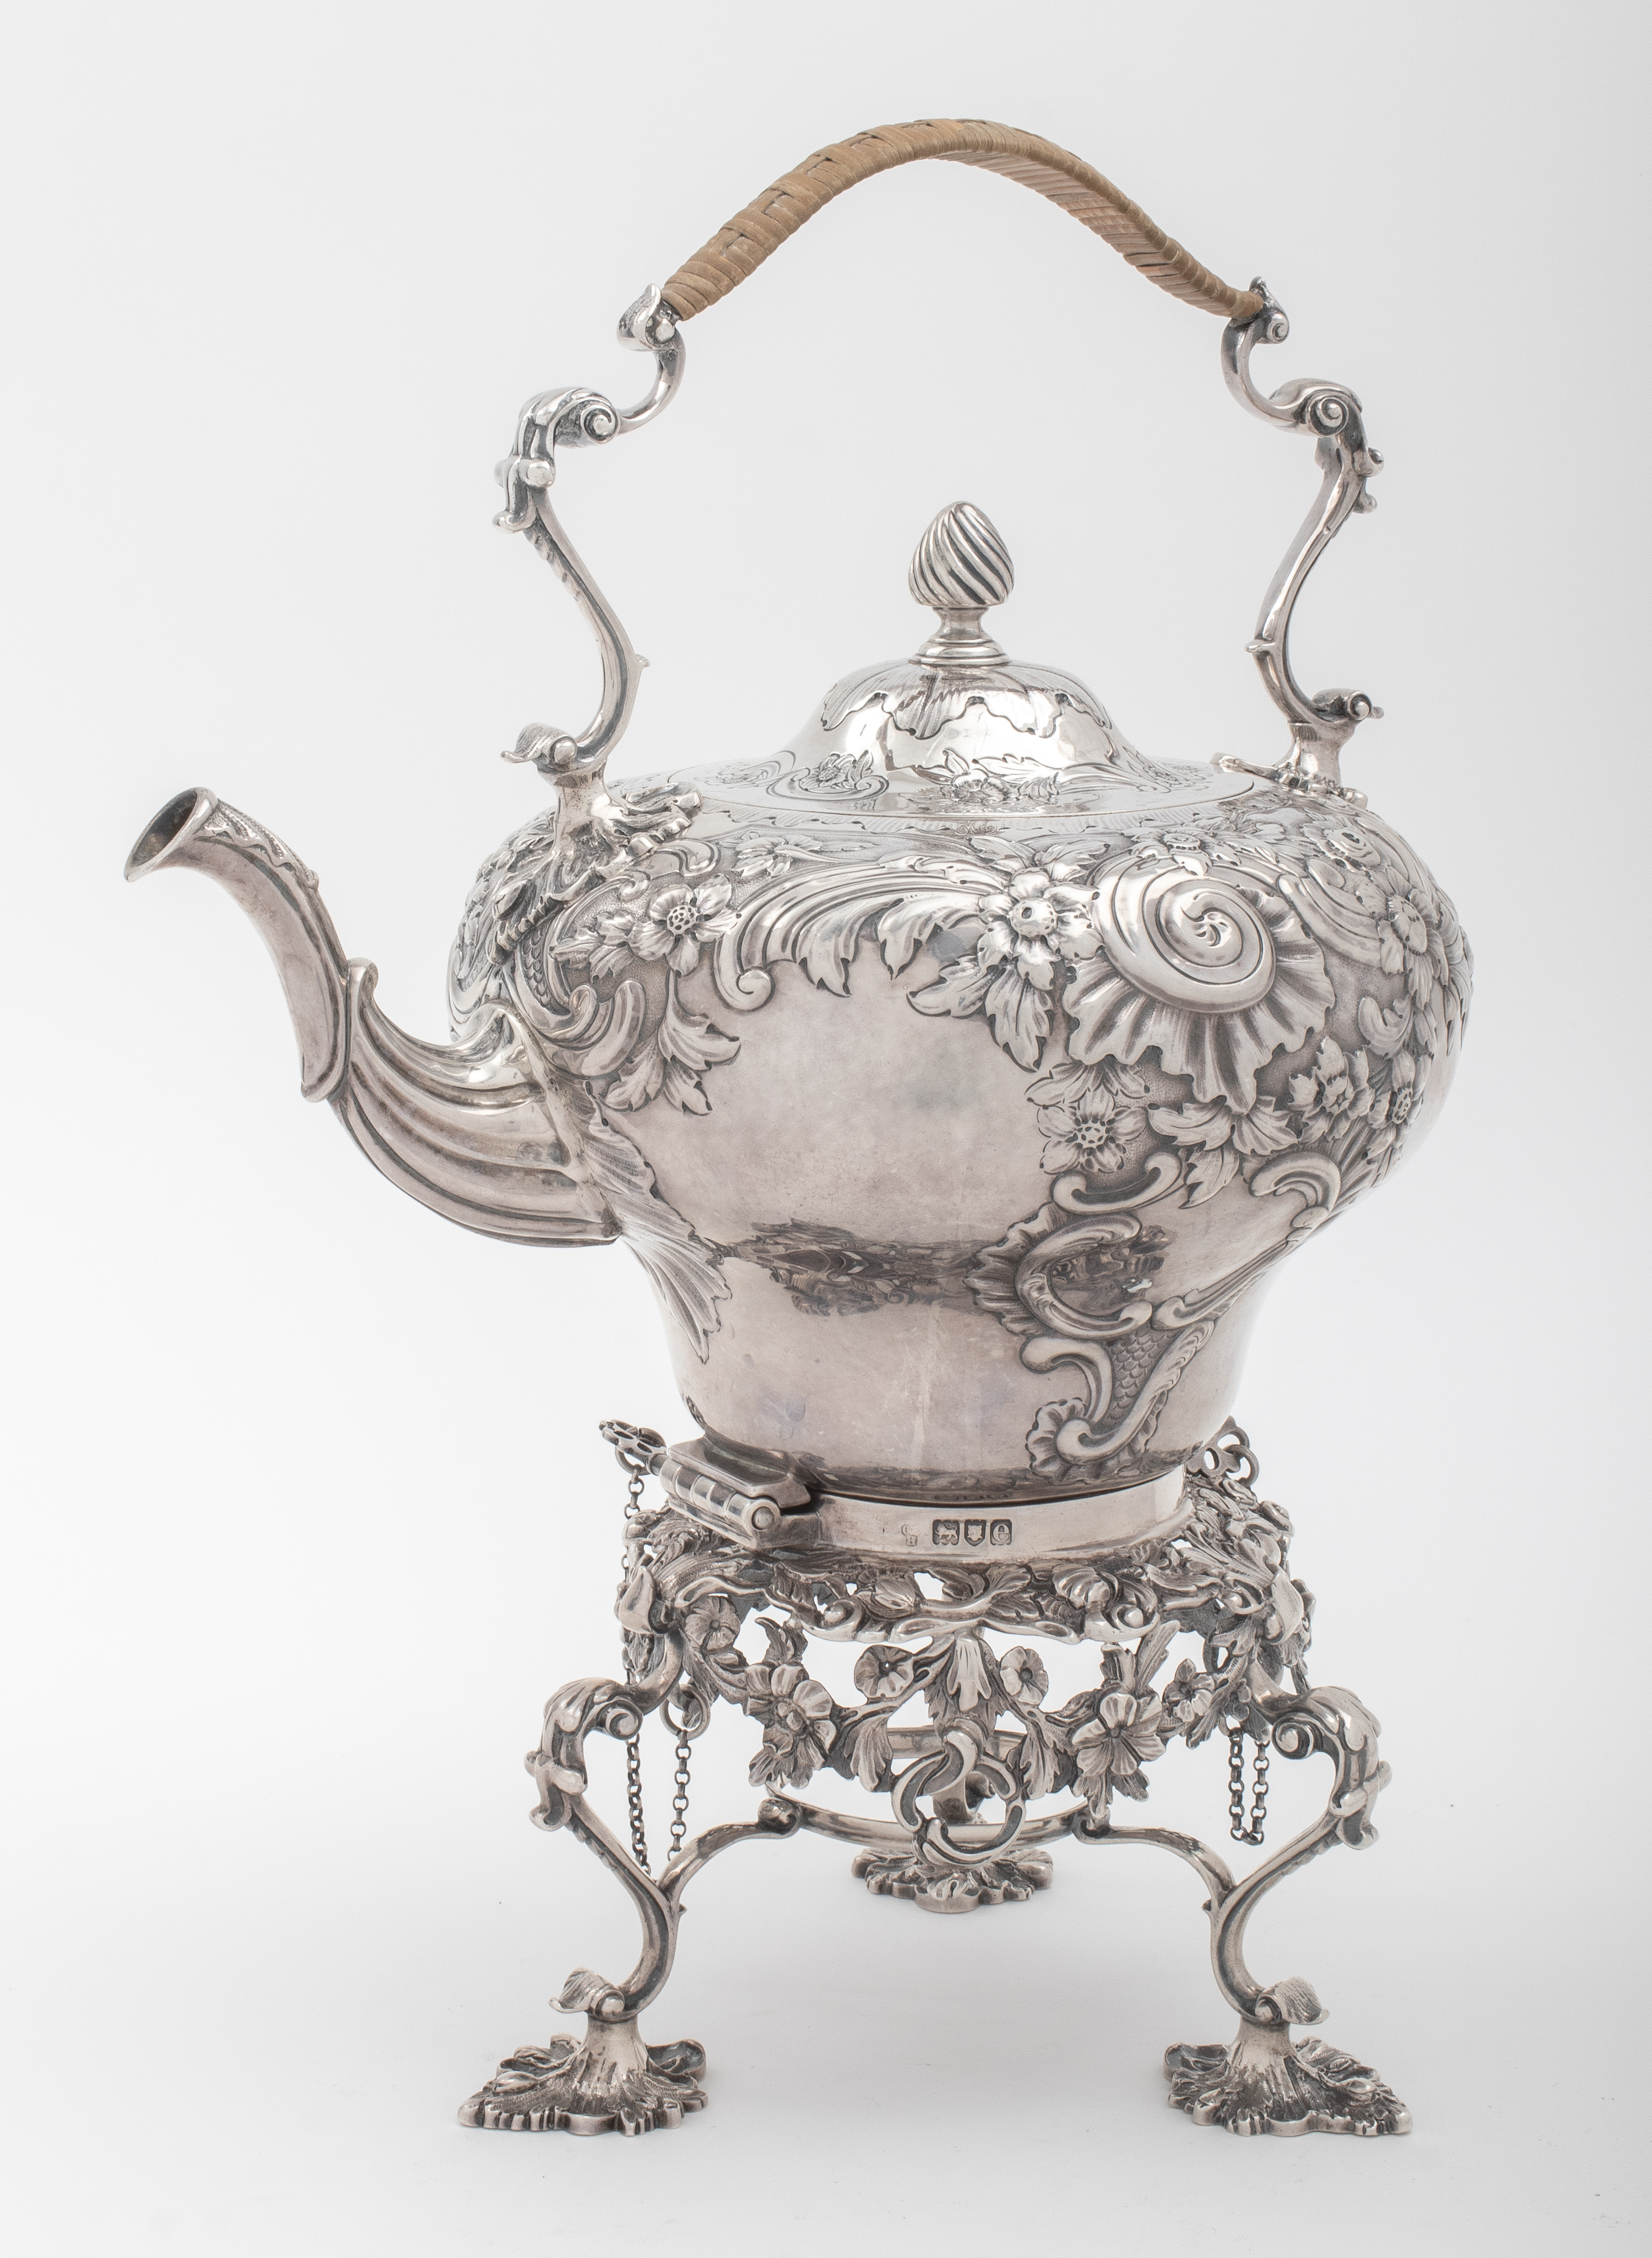 VICTORIAN STERLING SILVER KETTLE ON